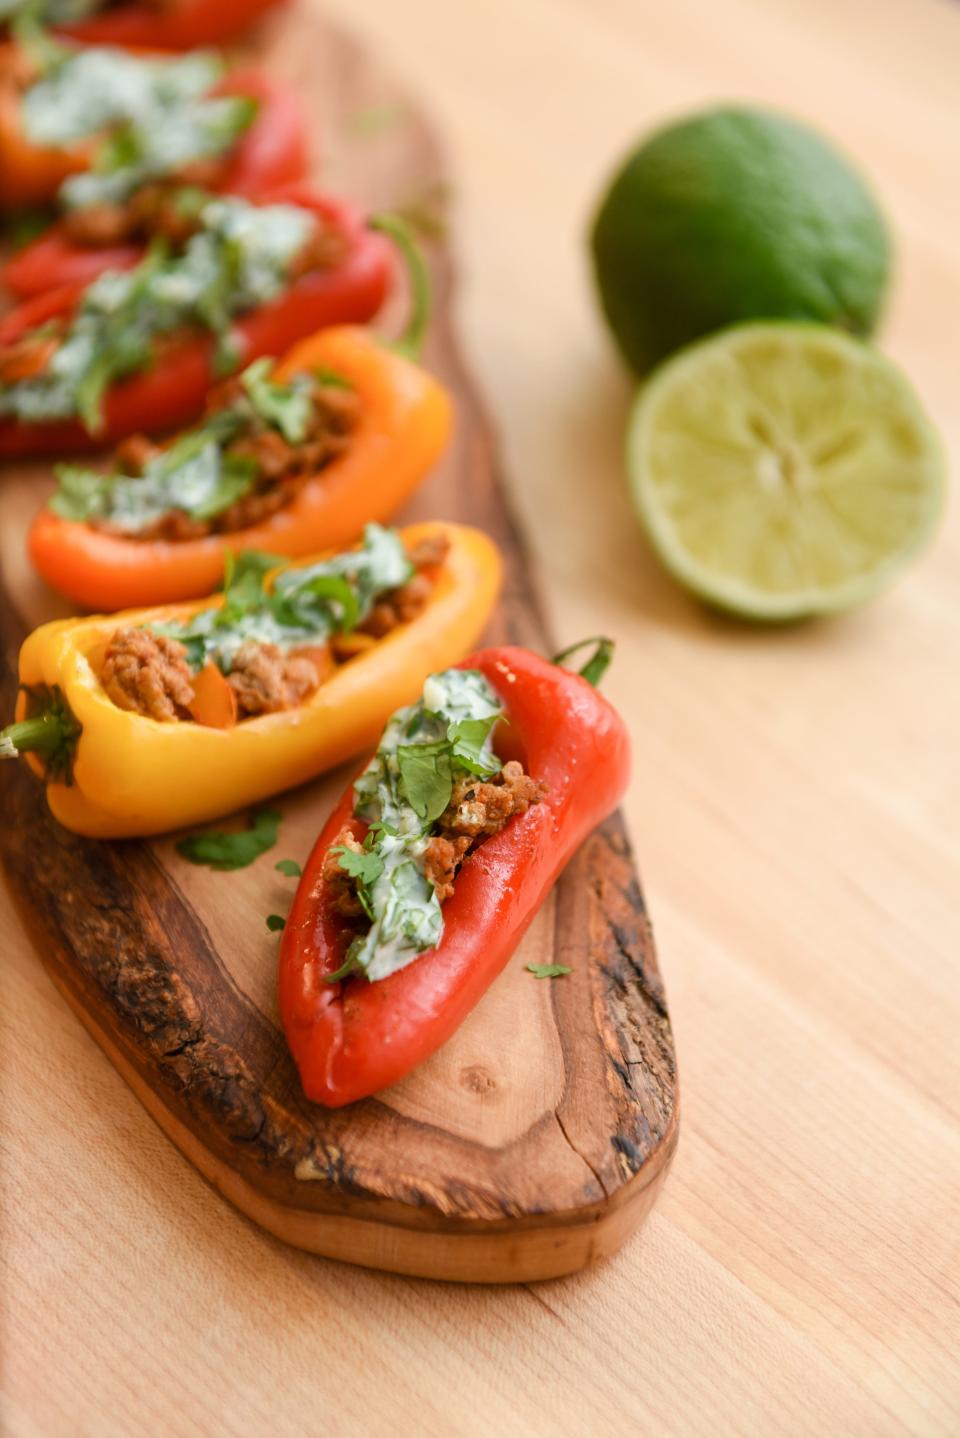 Each mini stuffed pepper has just 140 calories and 1.5 grams of fat.